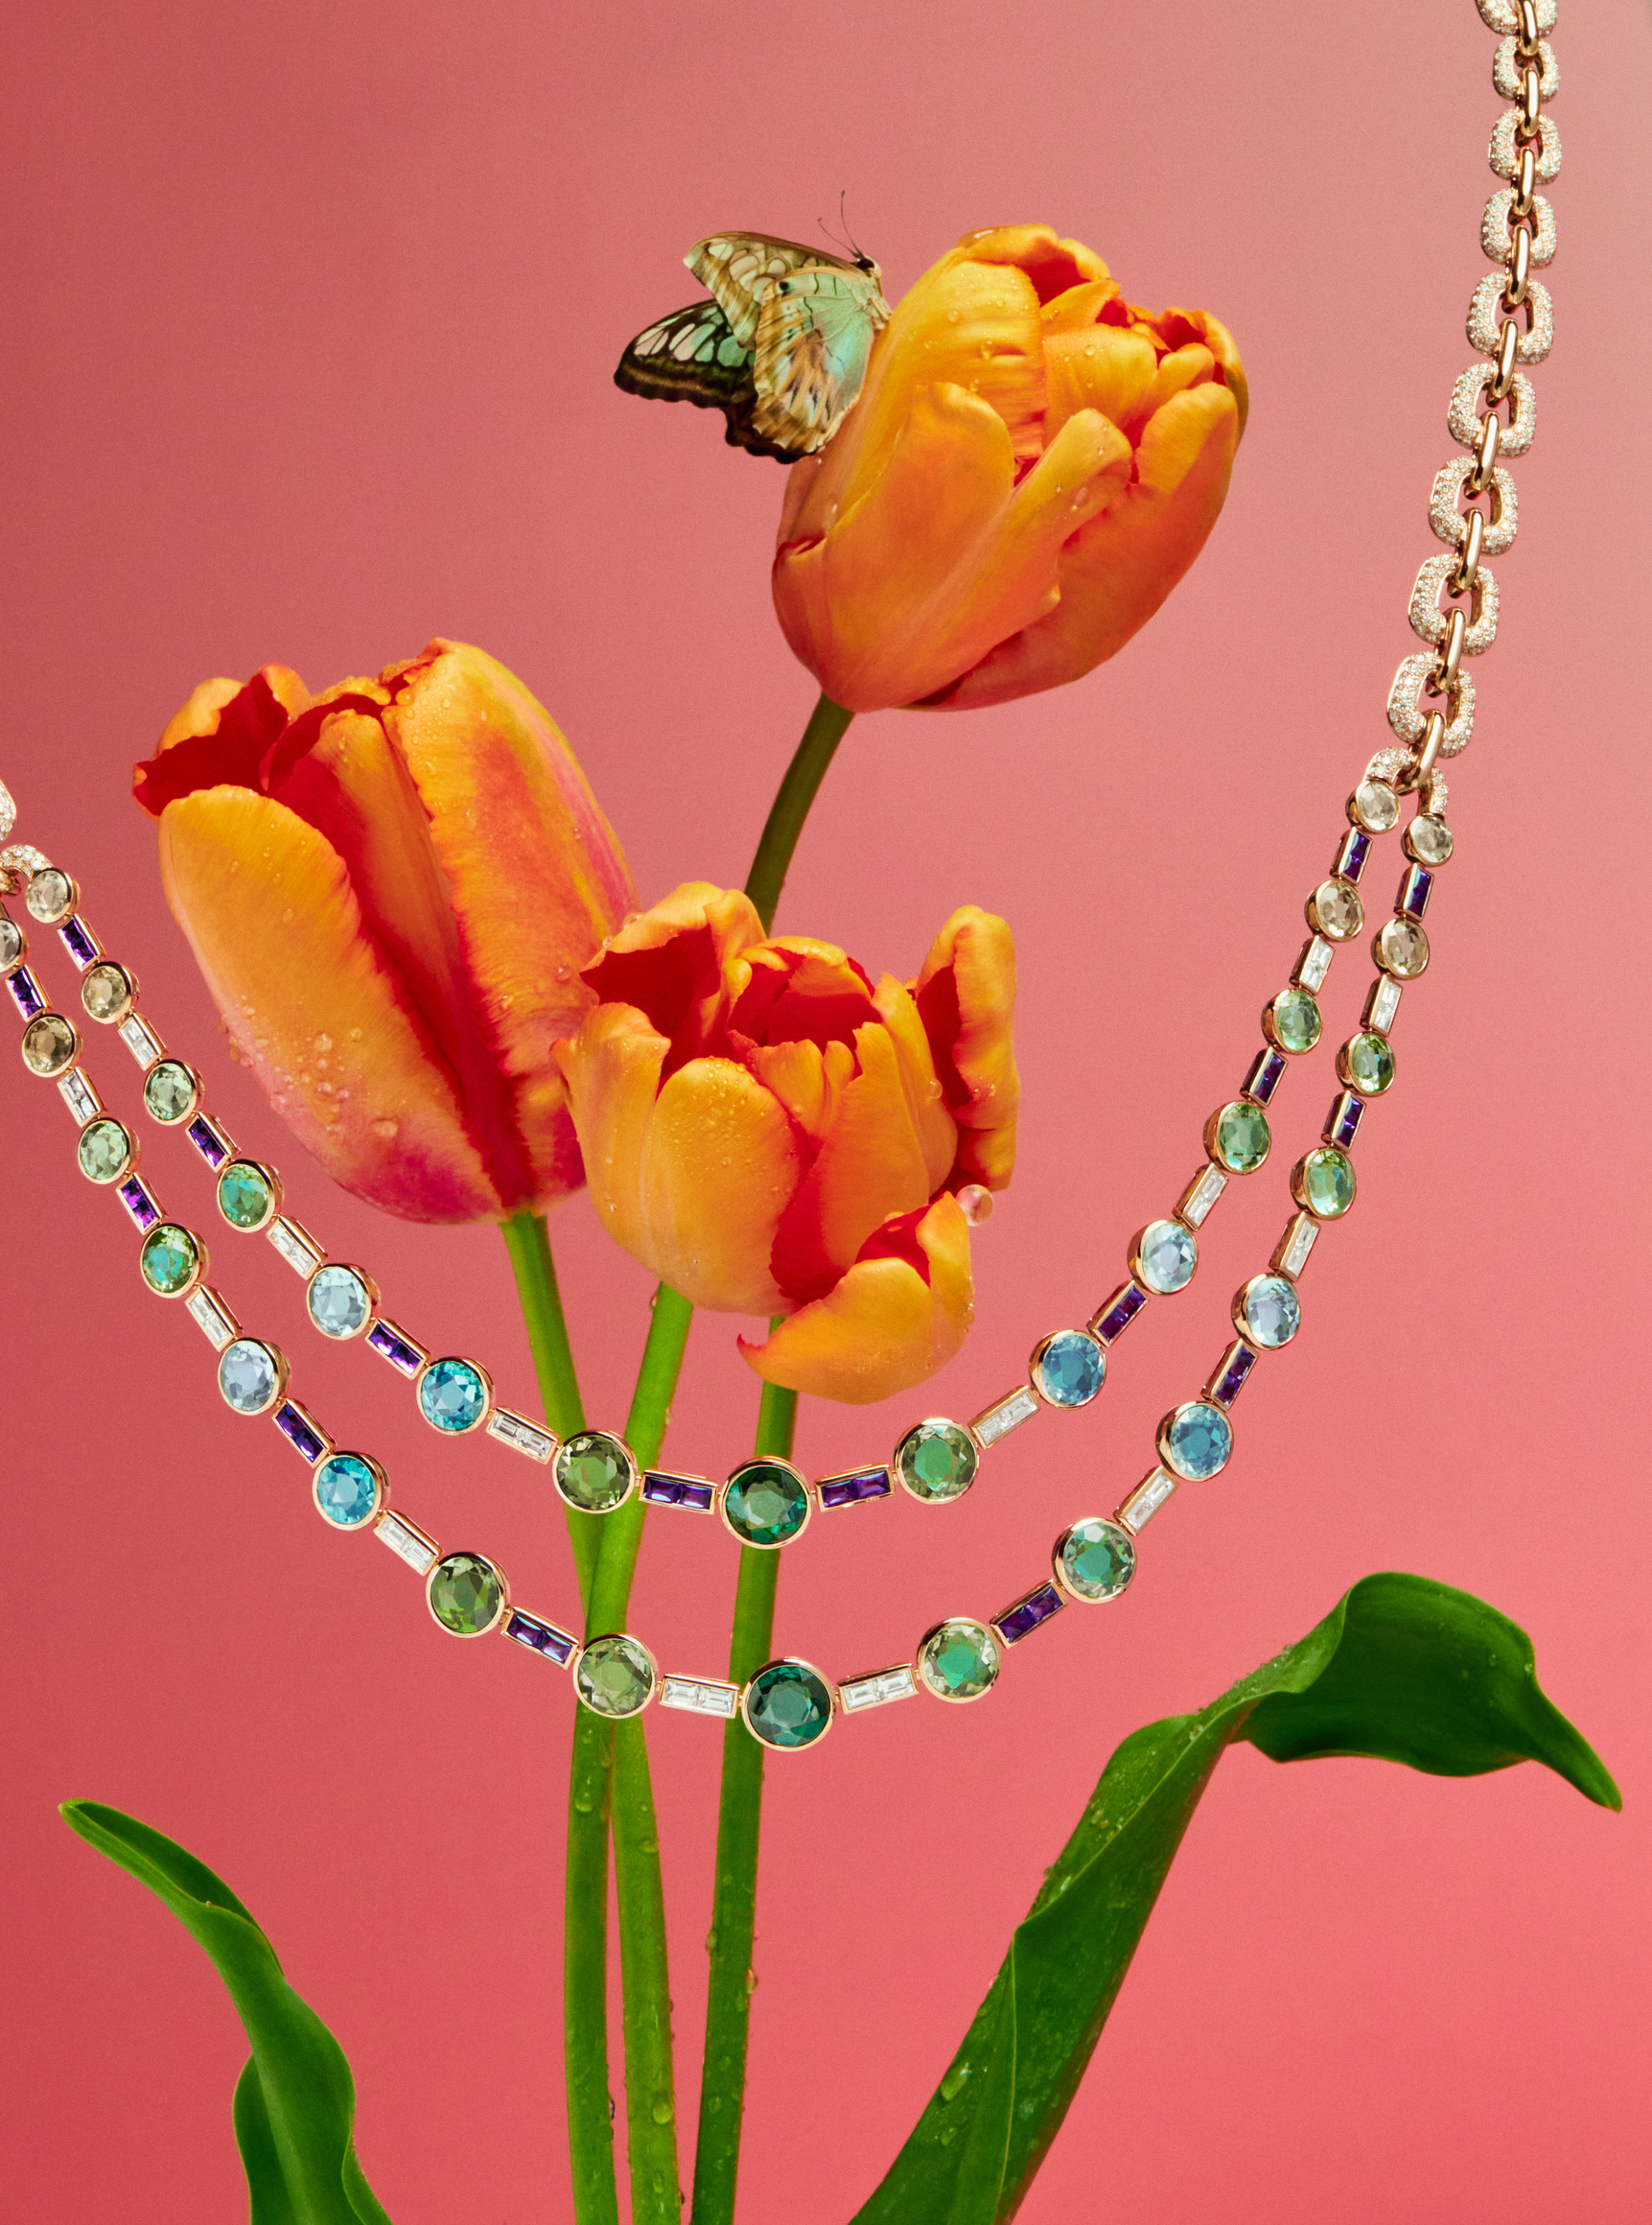 Bulgari Eden, Dior Print and more—dazzling new high jewellery collections to pay attention to (фото 2)